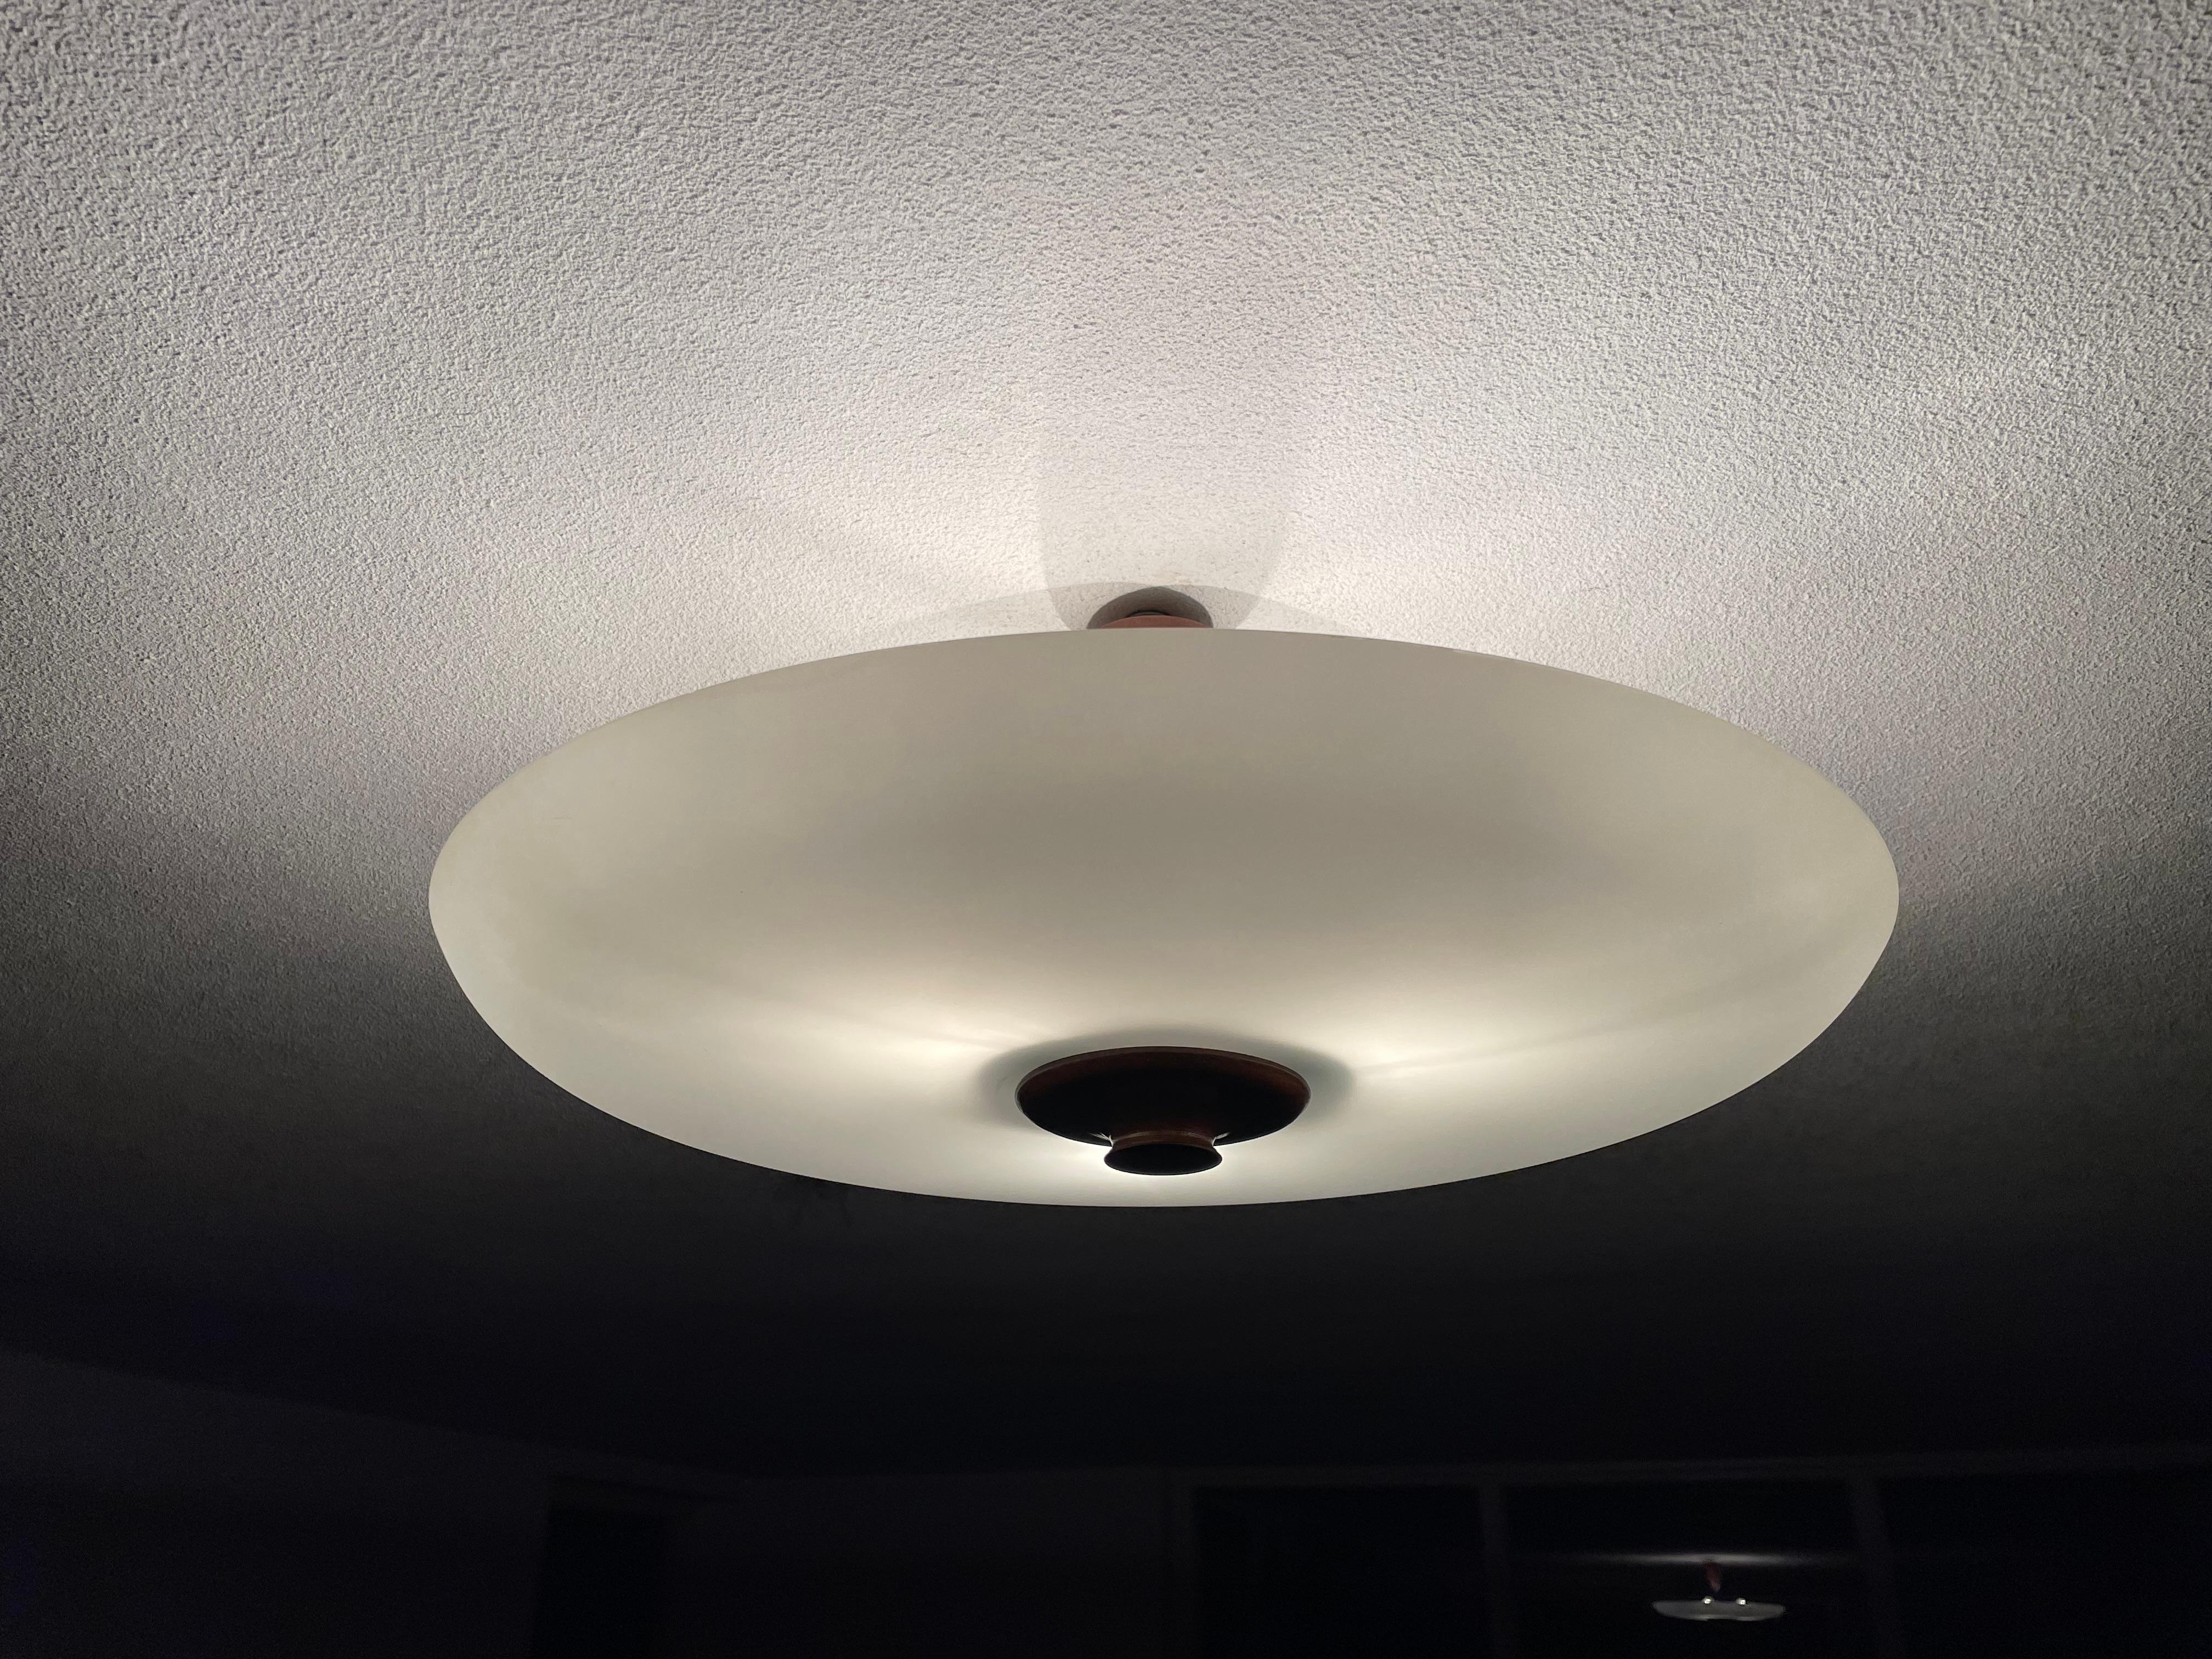 Mid-Century Modern three light flushmount.

This 1950s three-light flush mount has the most serene look and feel and you will hardly ever find a light fixture from the Mid-Century era in this good of a condition. Thanks to its matt white, single